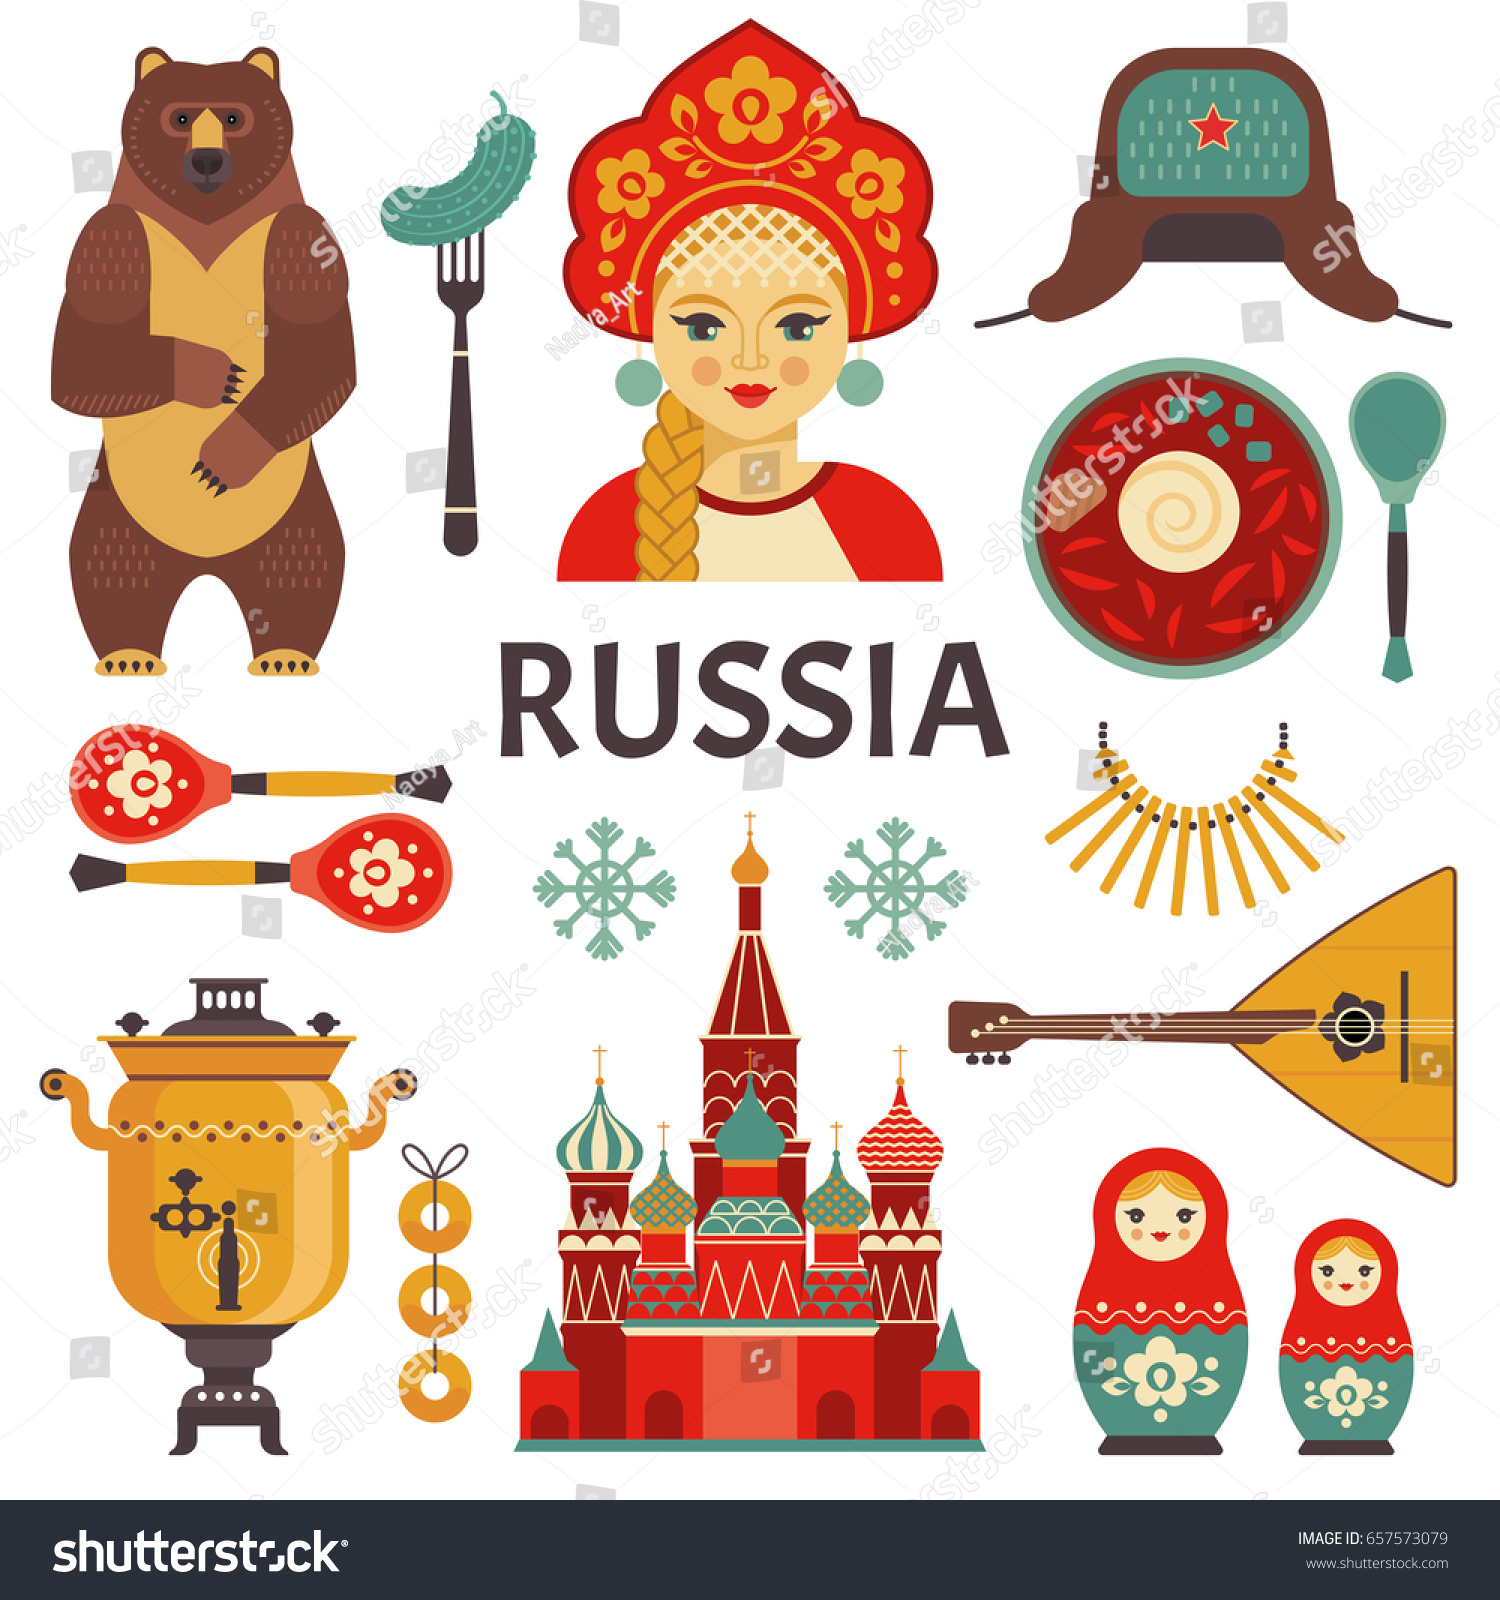 Russian Art From Icons 89